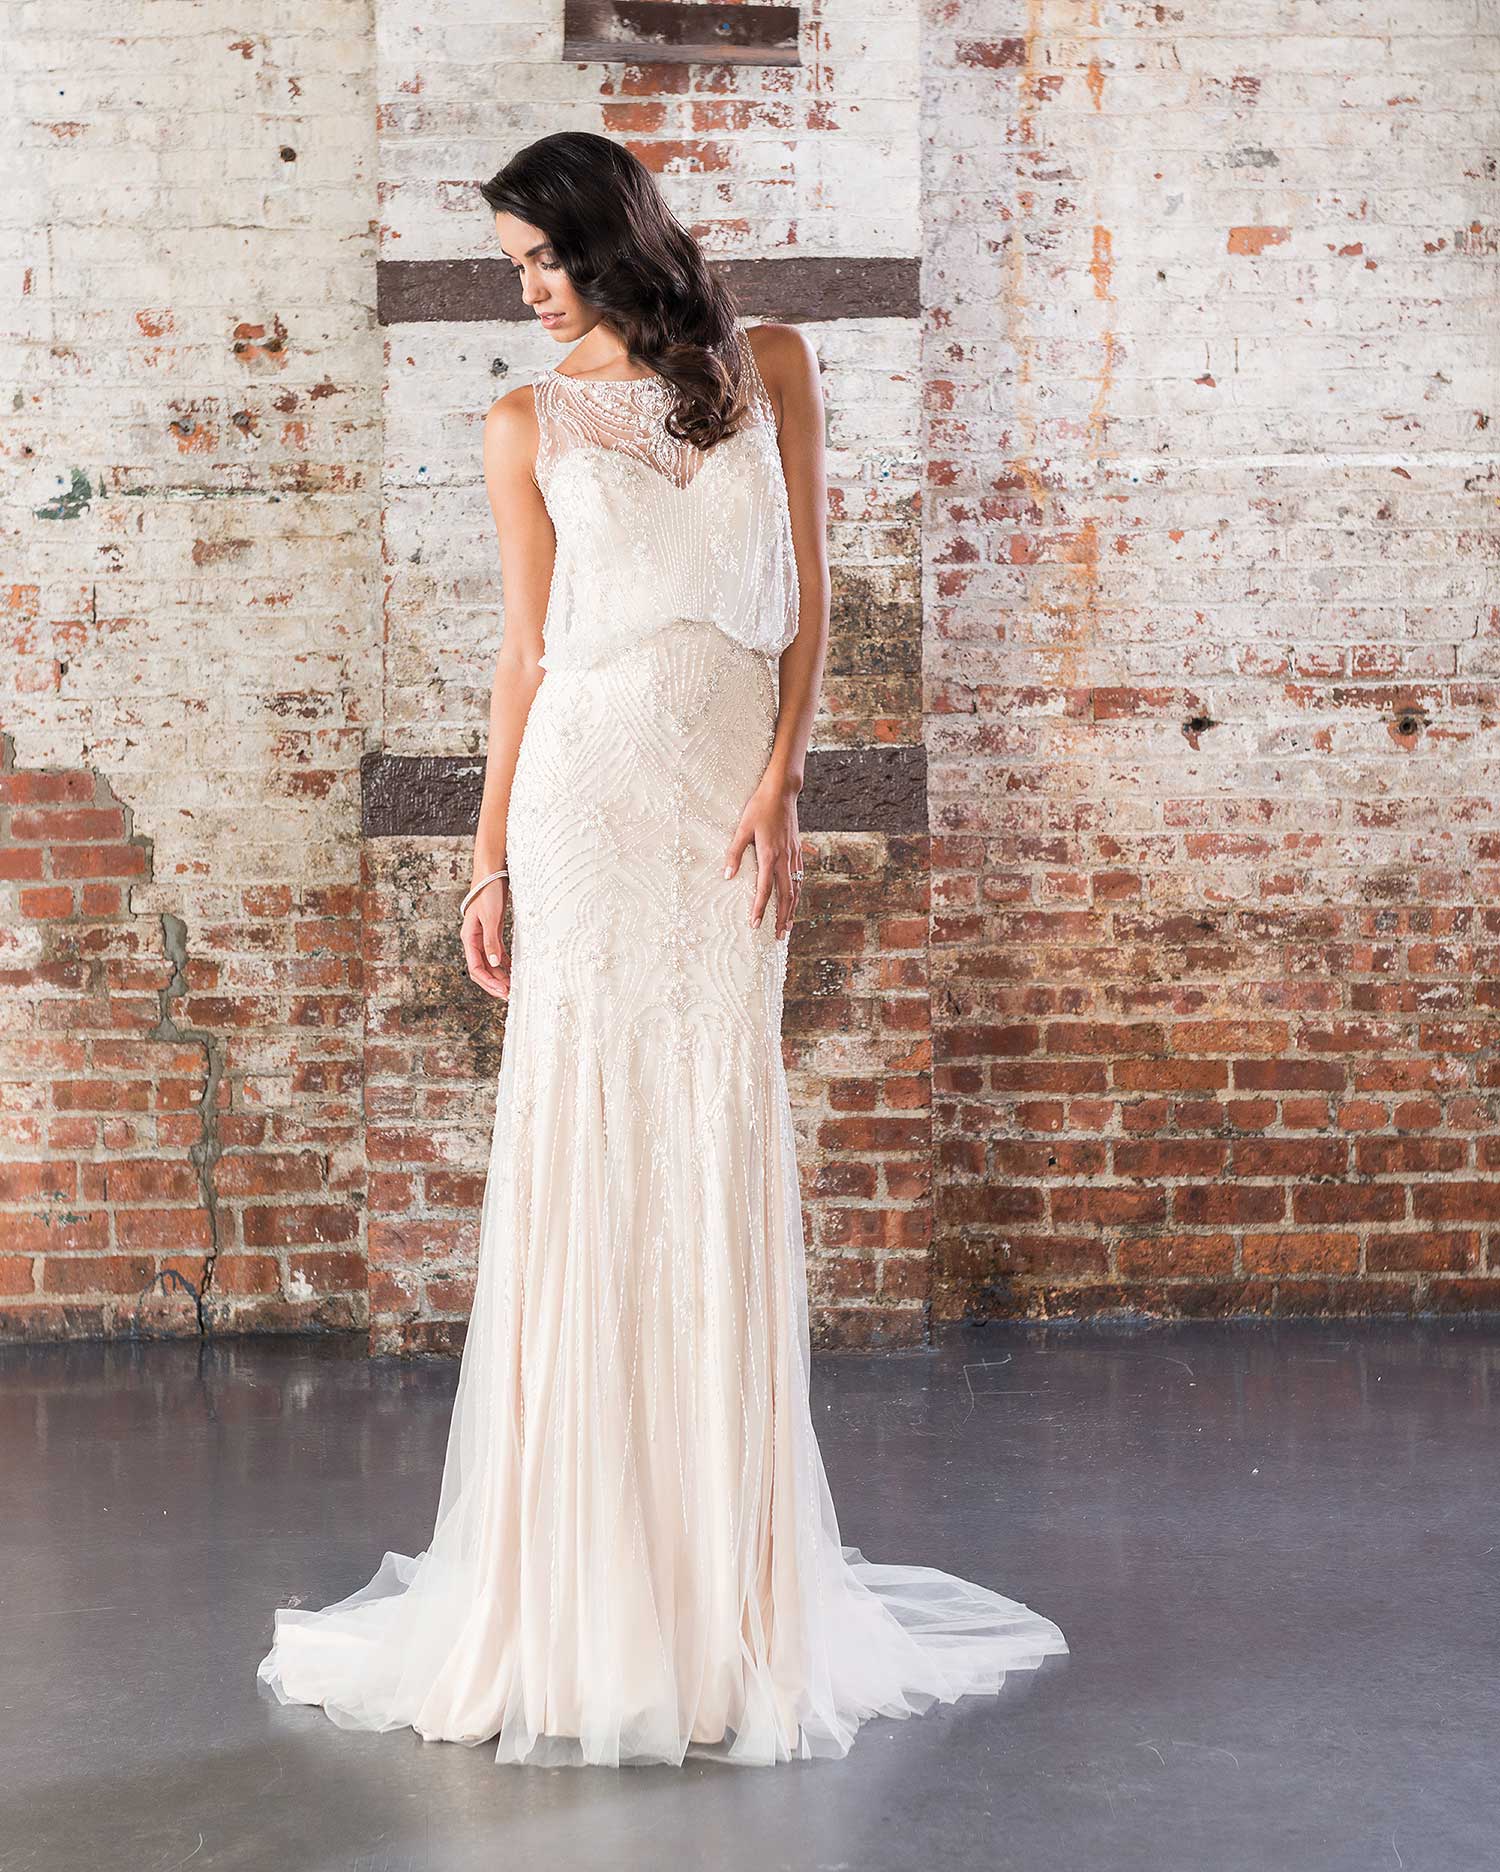 Fross Wedding Collections comes to Fulham for pop-up sample sale